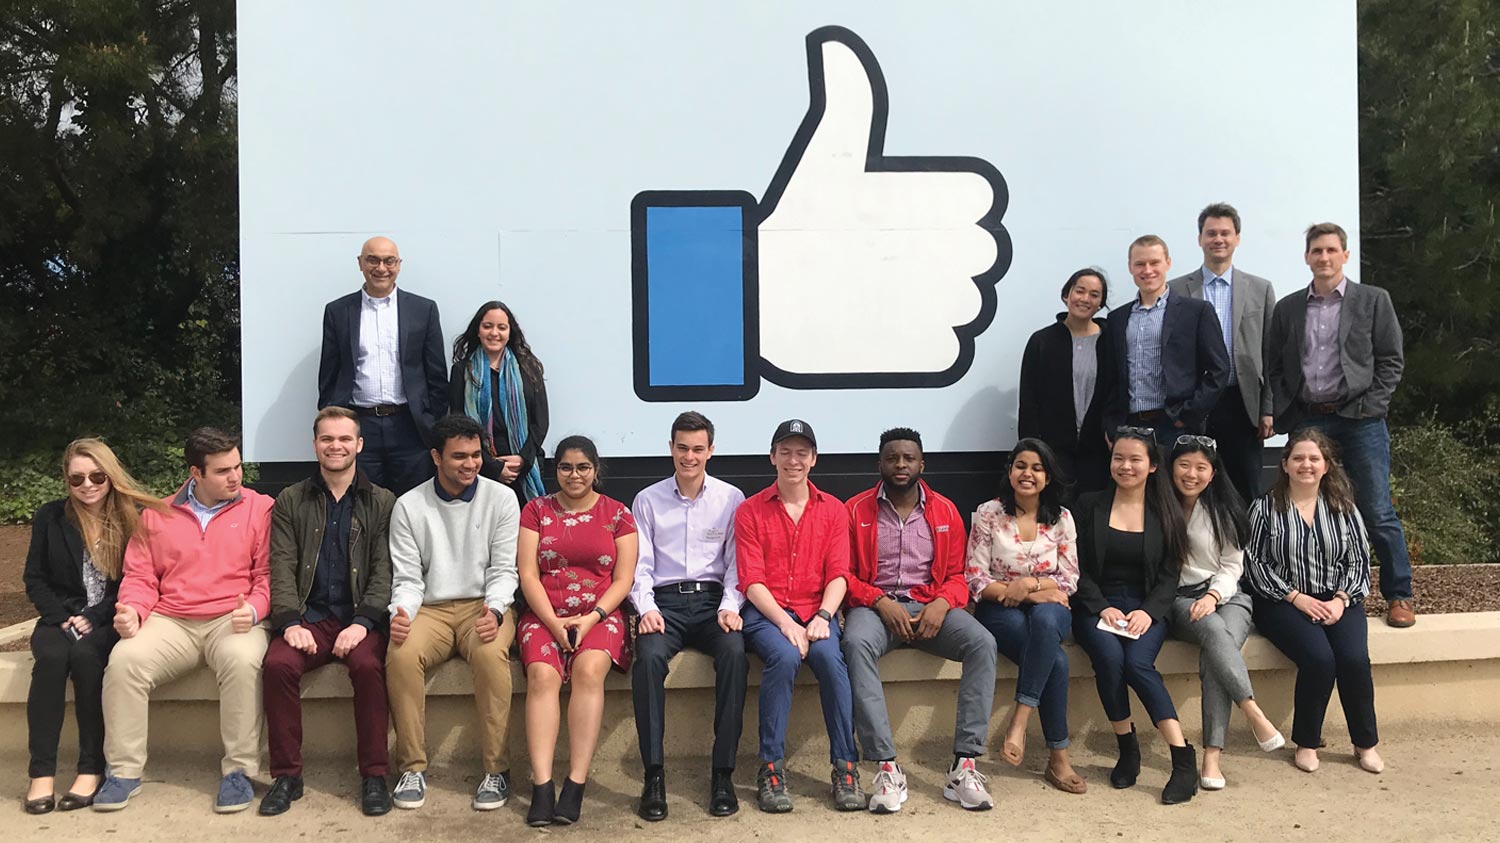 Tour of the Facebook campus with Bucknell